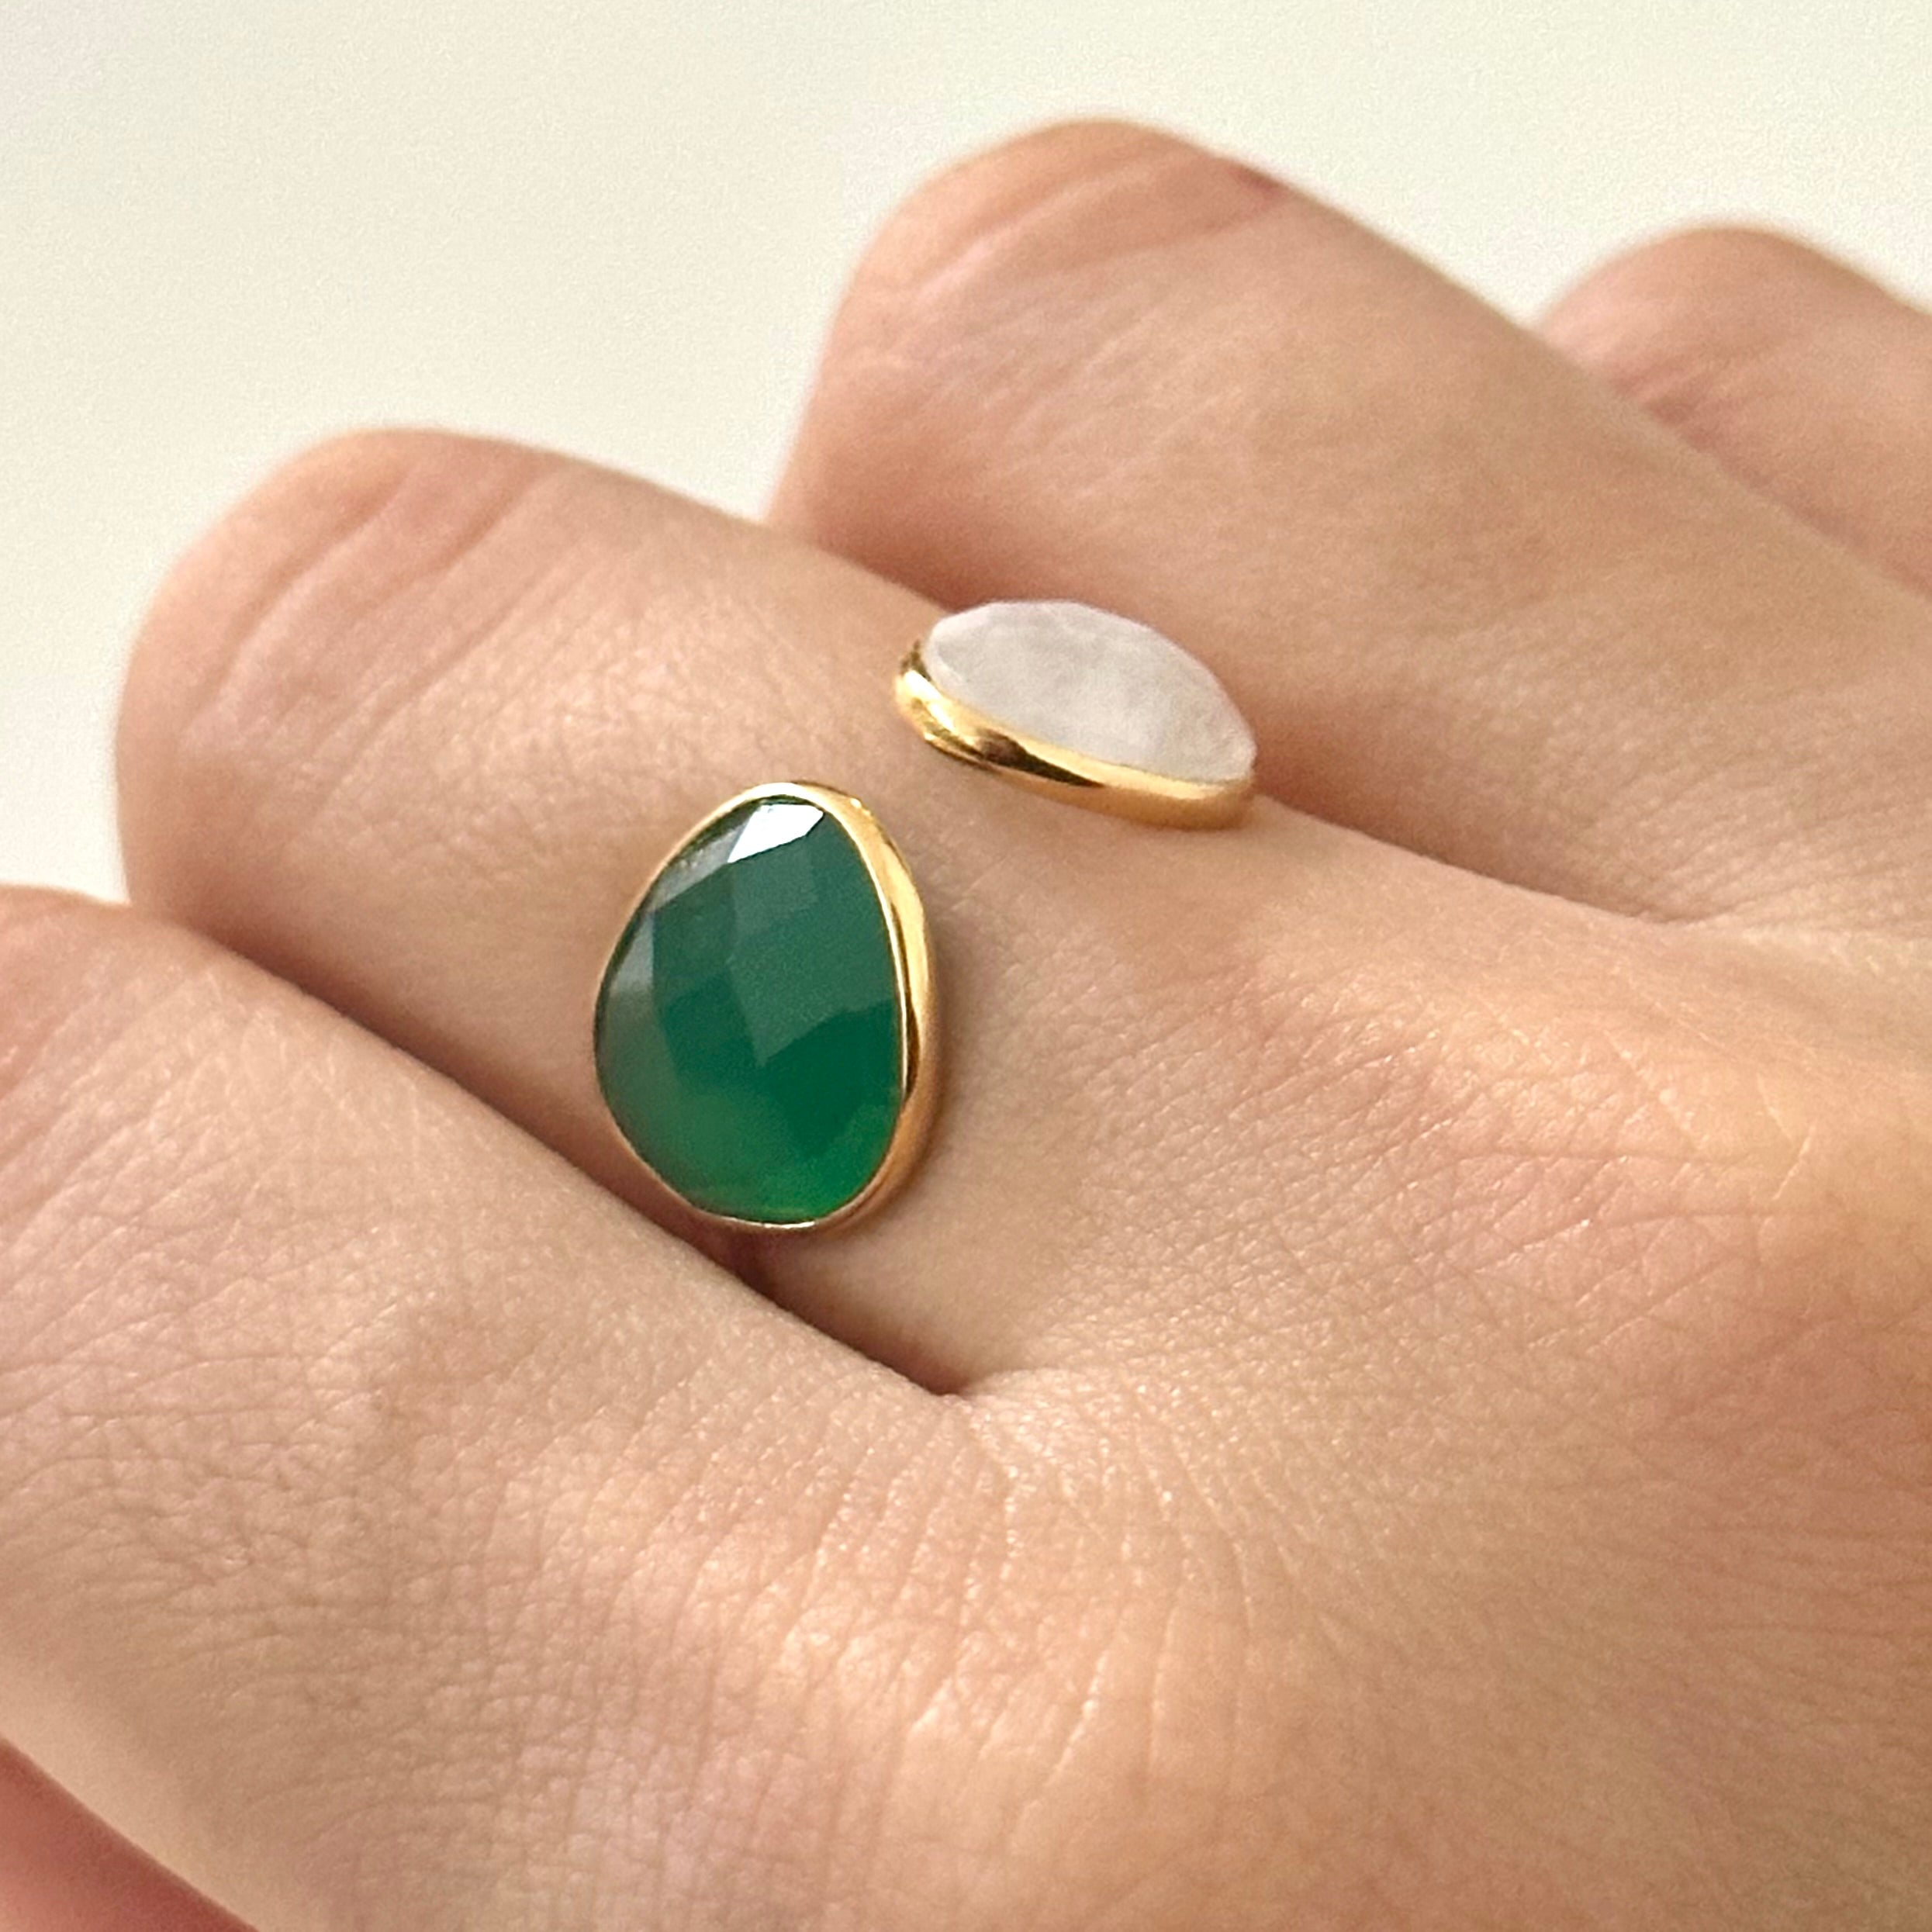 Gold Plated Sterling Silver Two Gemstone Ring with Green Onyx and Moonstone